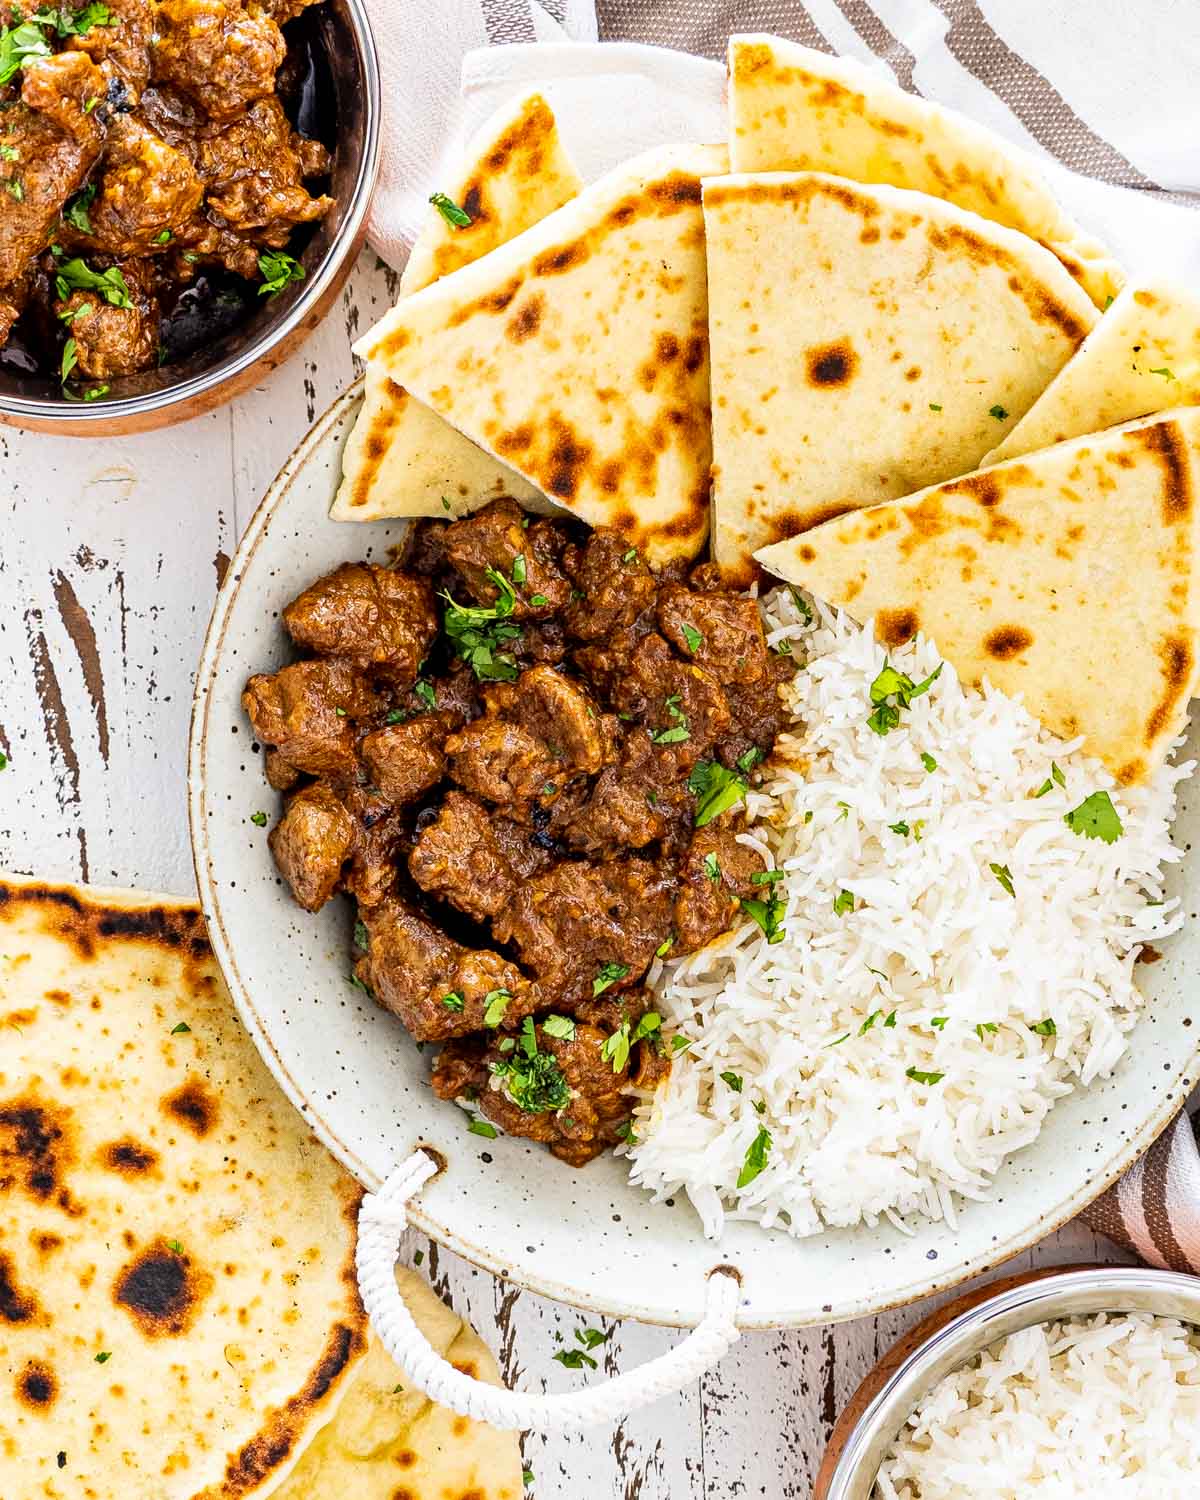 lamb korma with naan and rice in a dish.